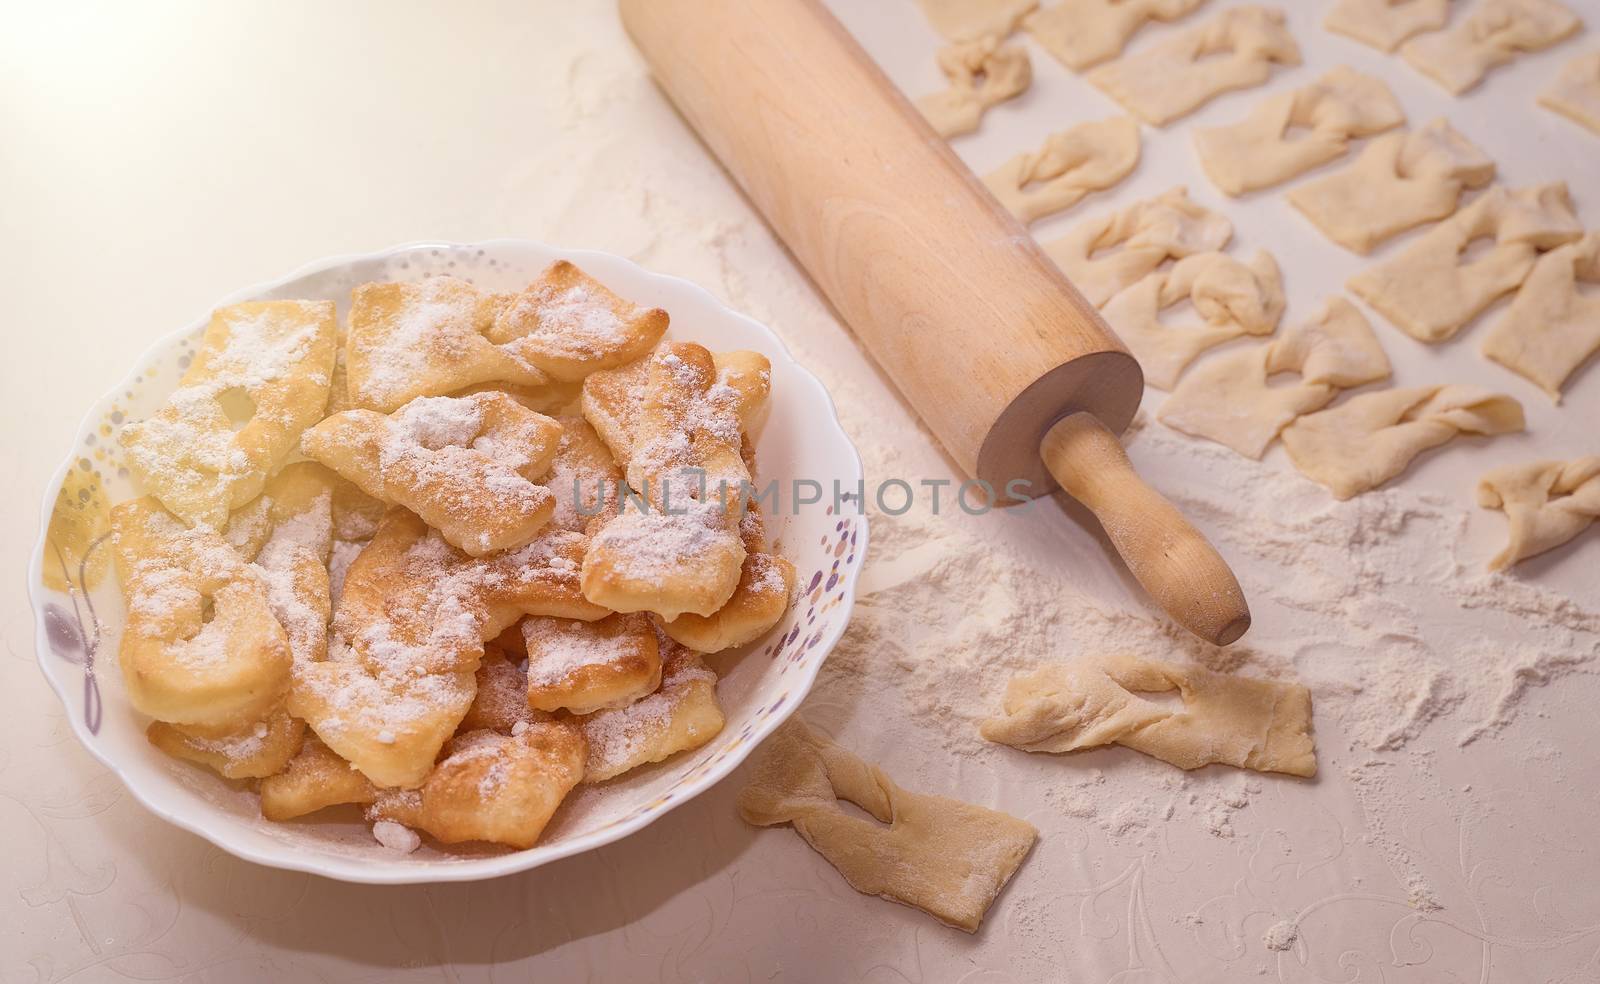 Homemade pastry, sprinkled with powdered sugar on a light table. High quality photo